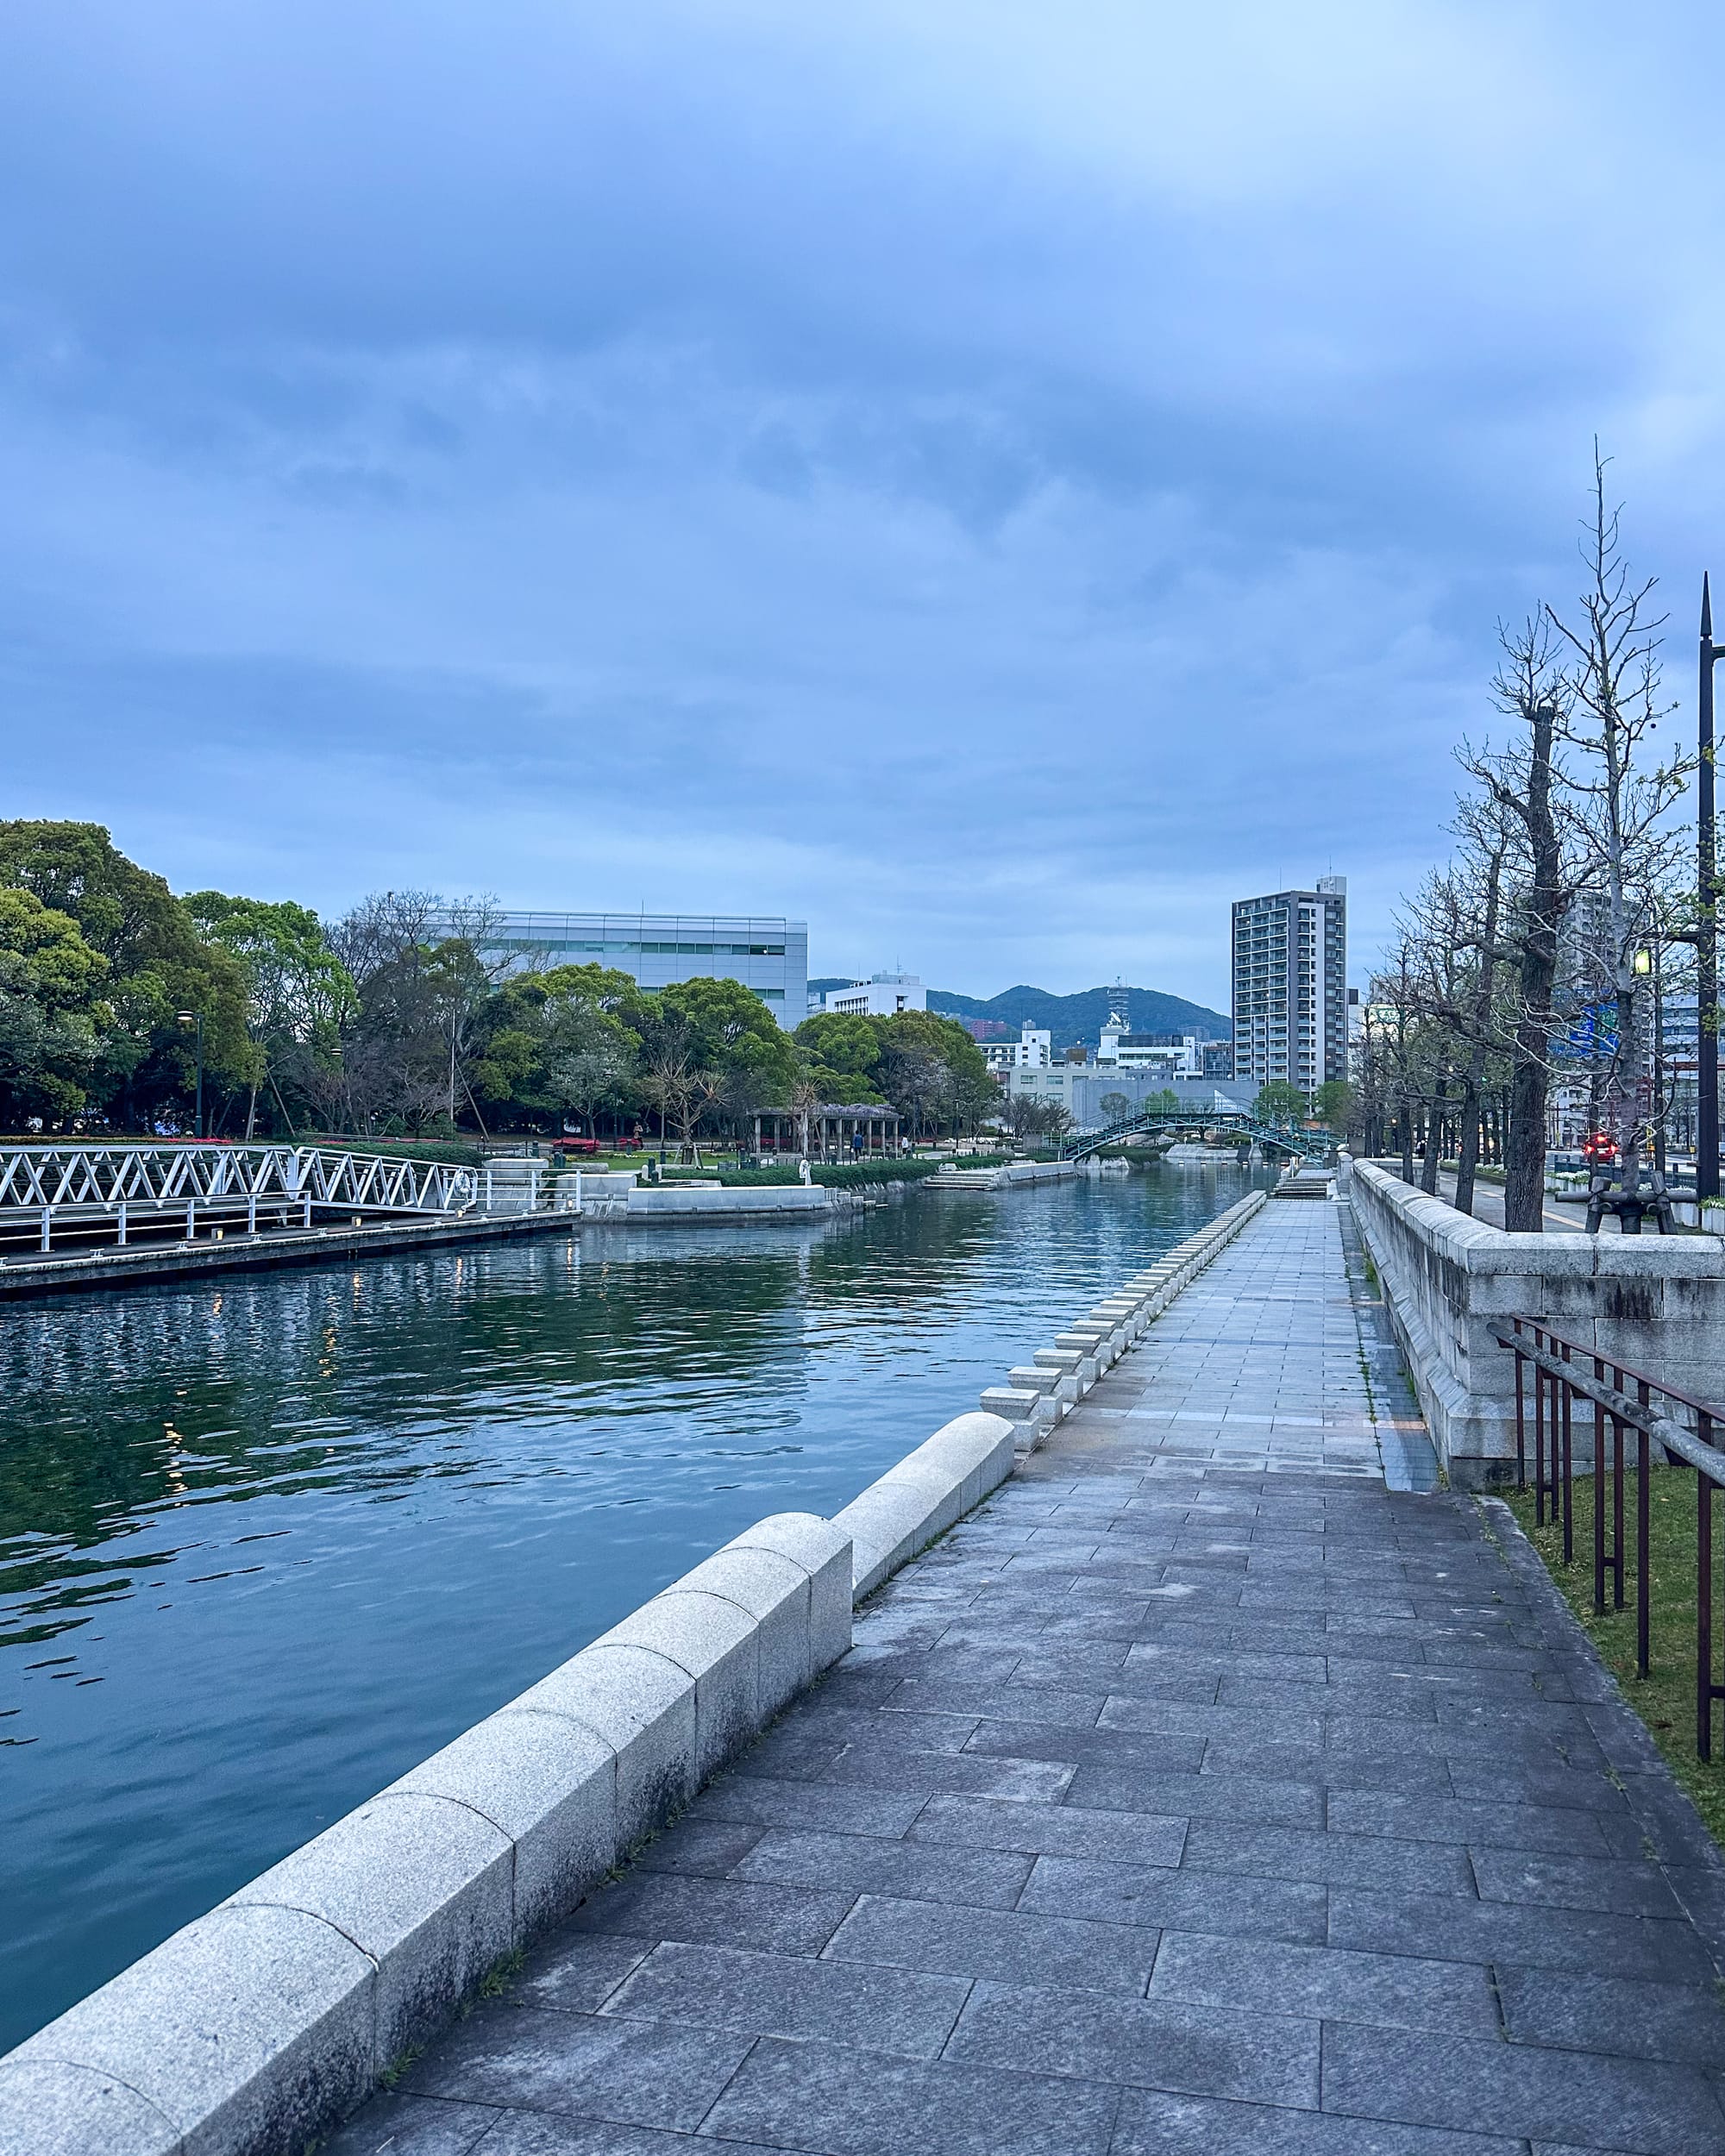 Discovering Nagasaki: From Atomic History to Peaceful Harmony